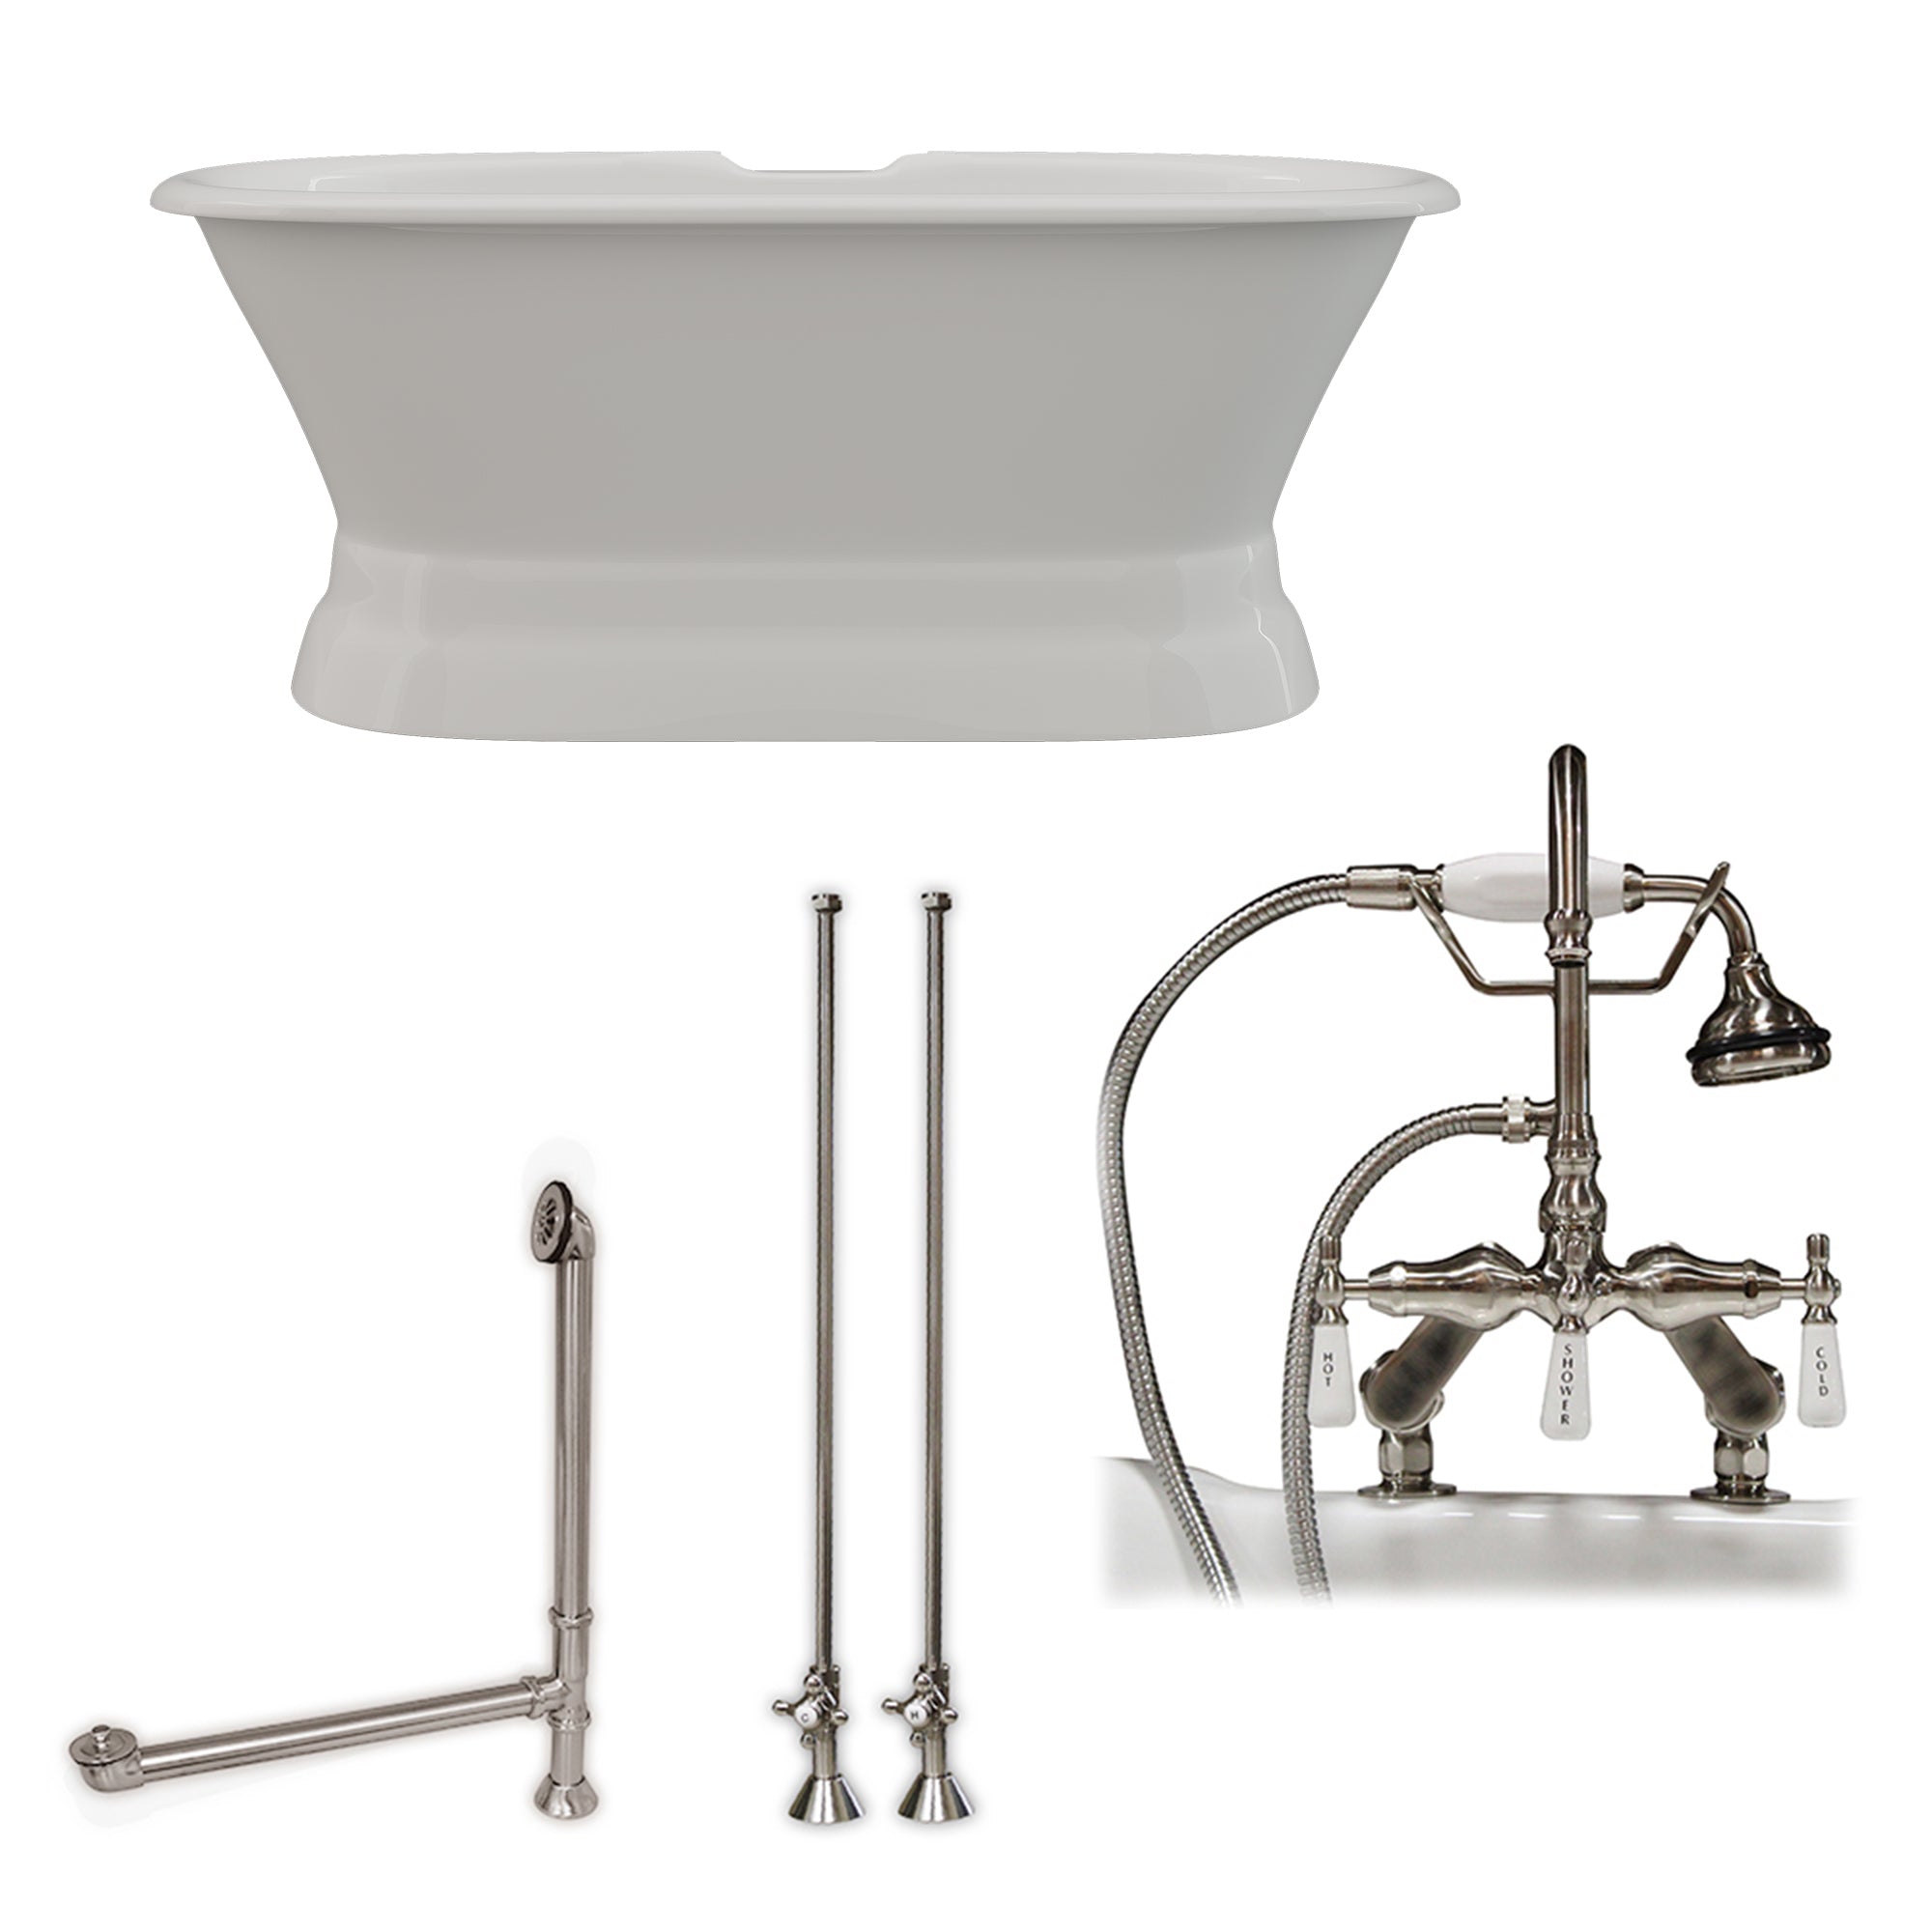 Cambridge Plumbing 60-Inch Double Ended Cast Iron Pedestal Soaking Tub (Porcelain interior and painted exterior) and Complete Plumbing Package (Brushed nickel) DE60-PED-684D-PKG - Vital Hydrotherapy